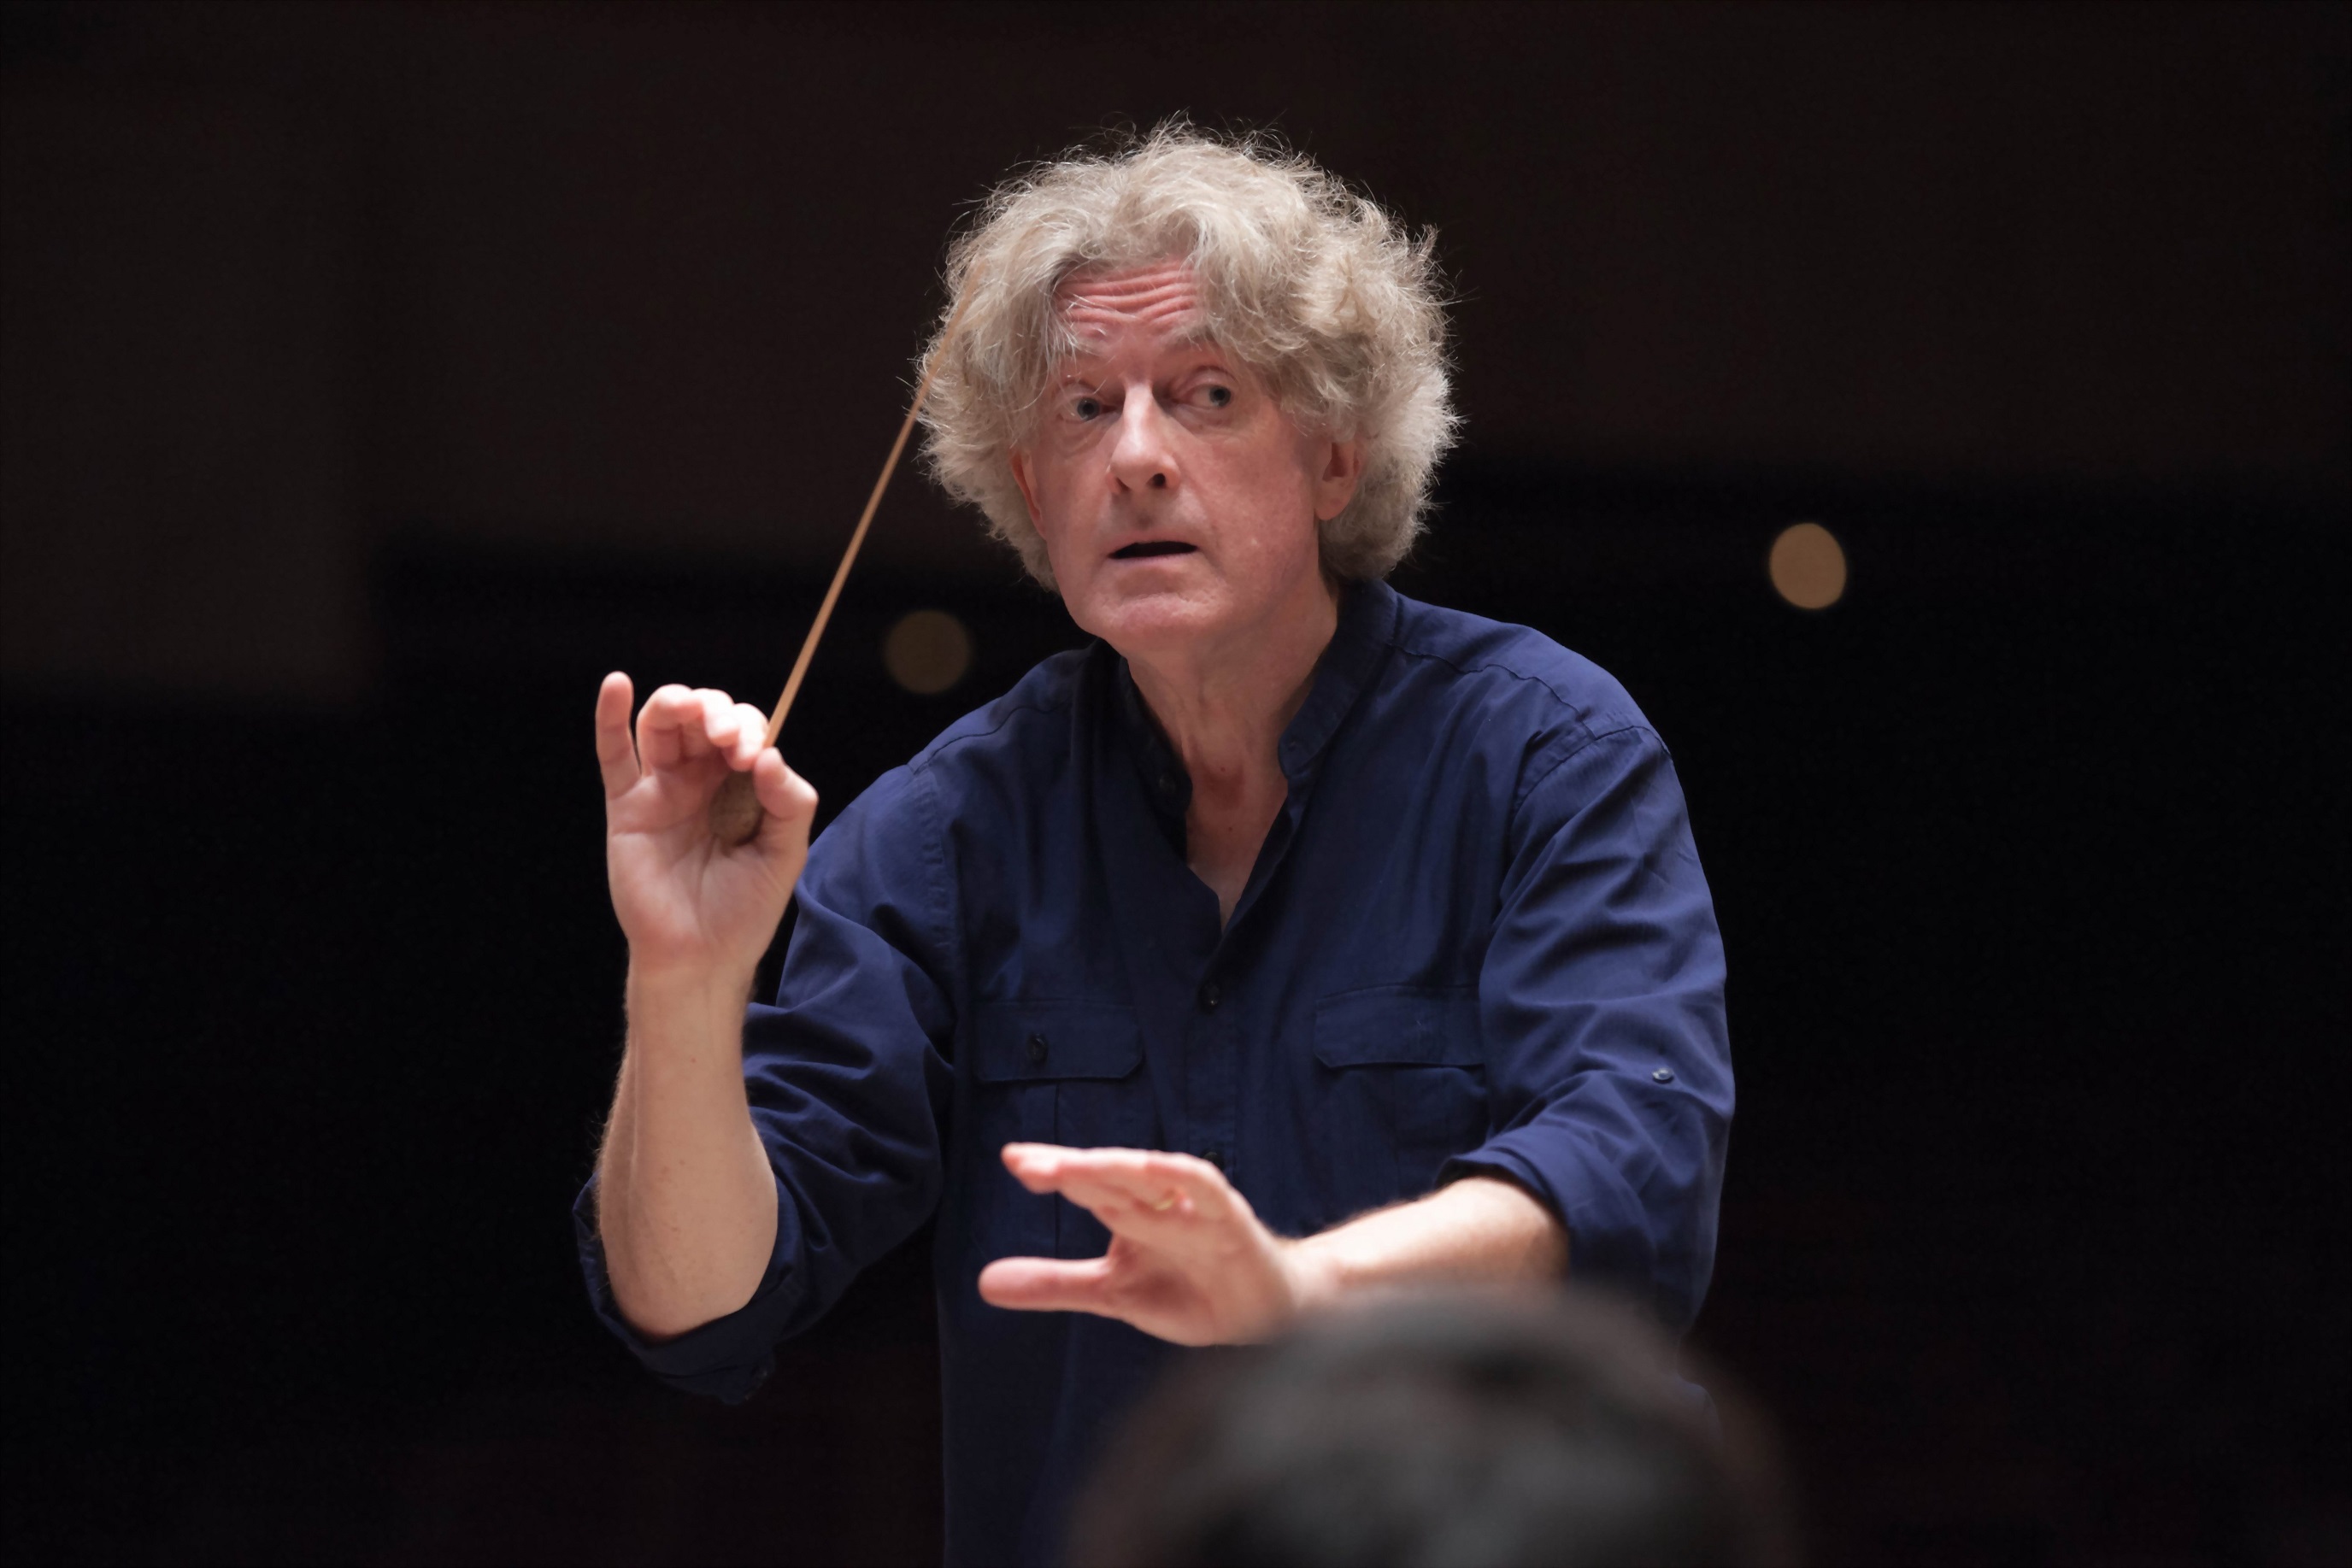 Conductor James Judd is looking forward to performing in Dunedin. Photo: Gabriel Mara Isser